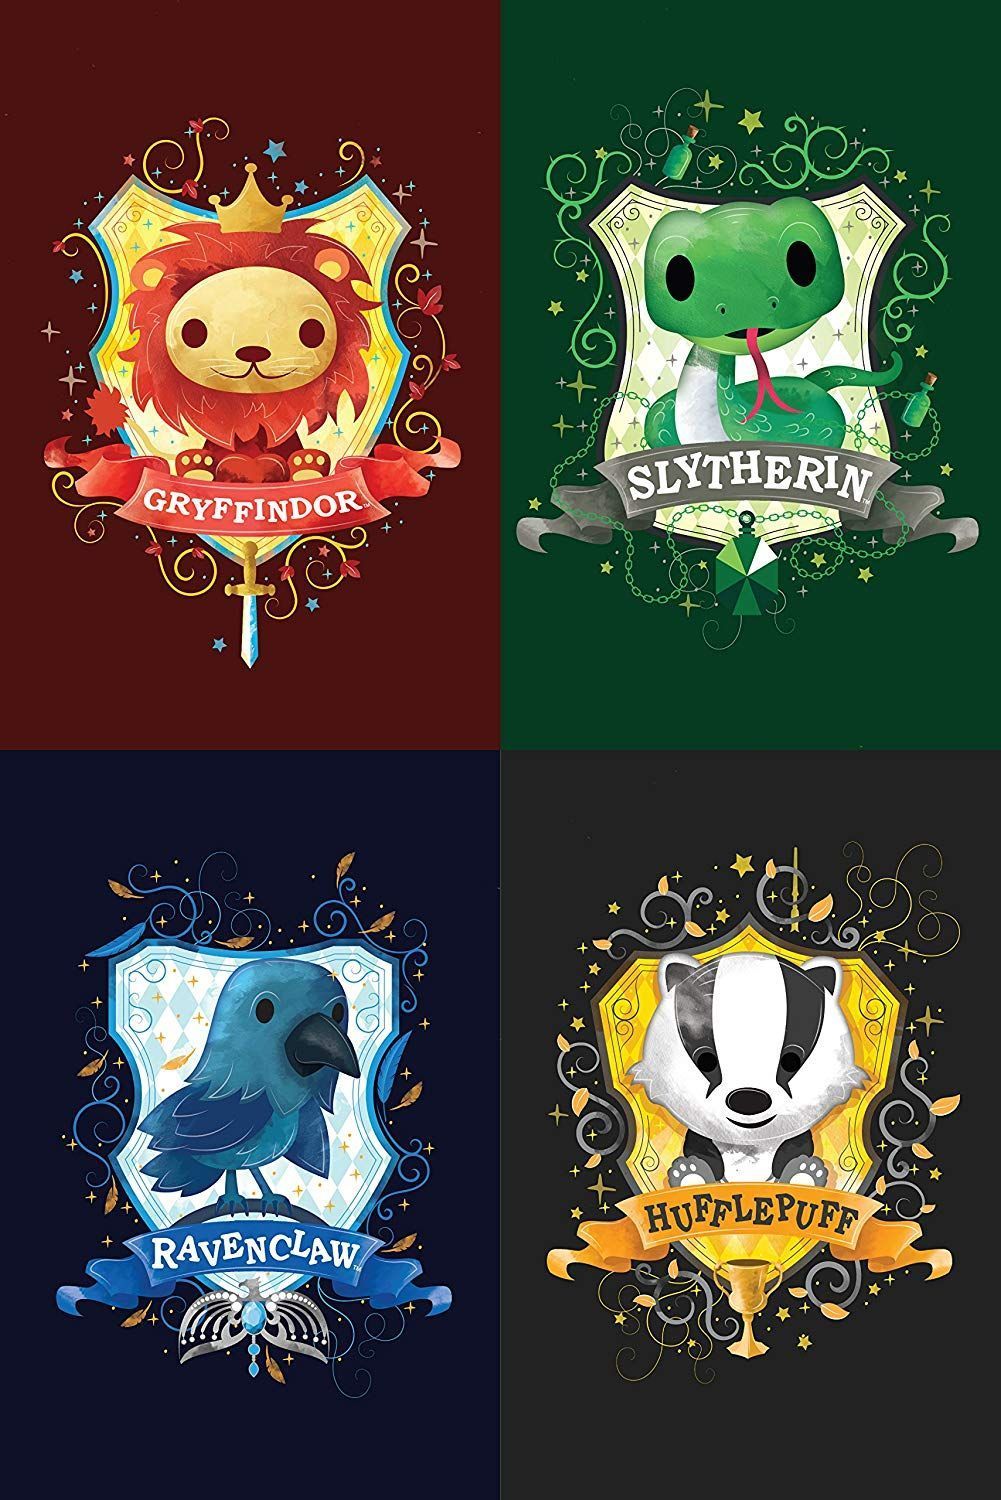 Four house crest posters for Harry Potter, featuring Gryffindor, Slytherin, Ravenclaw, and Hufflepuff. - Slytherin